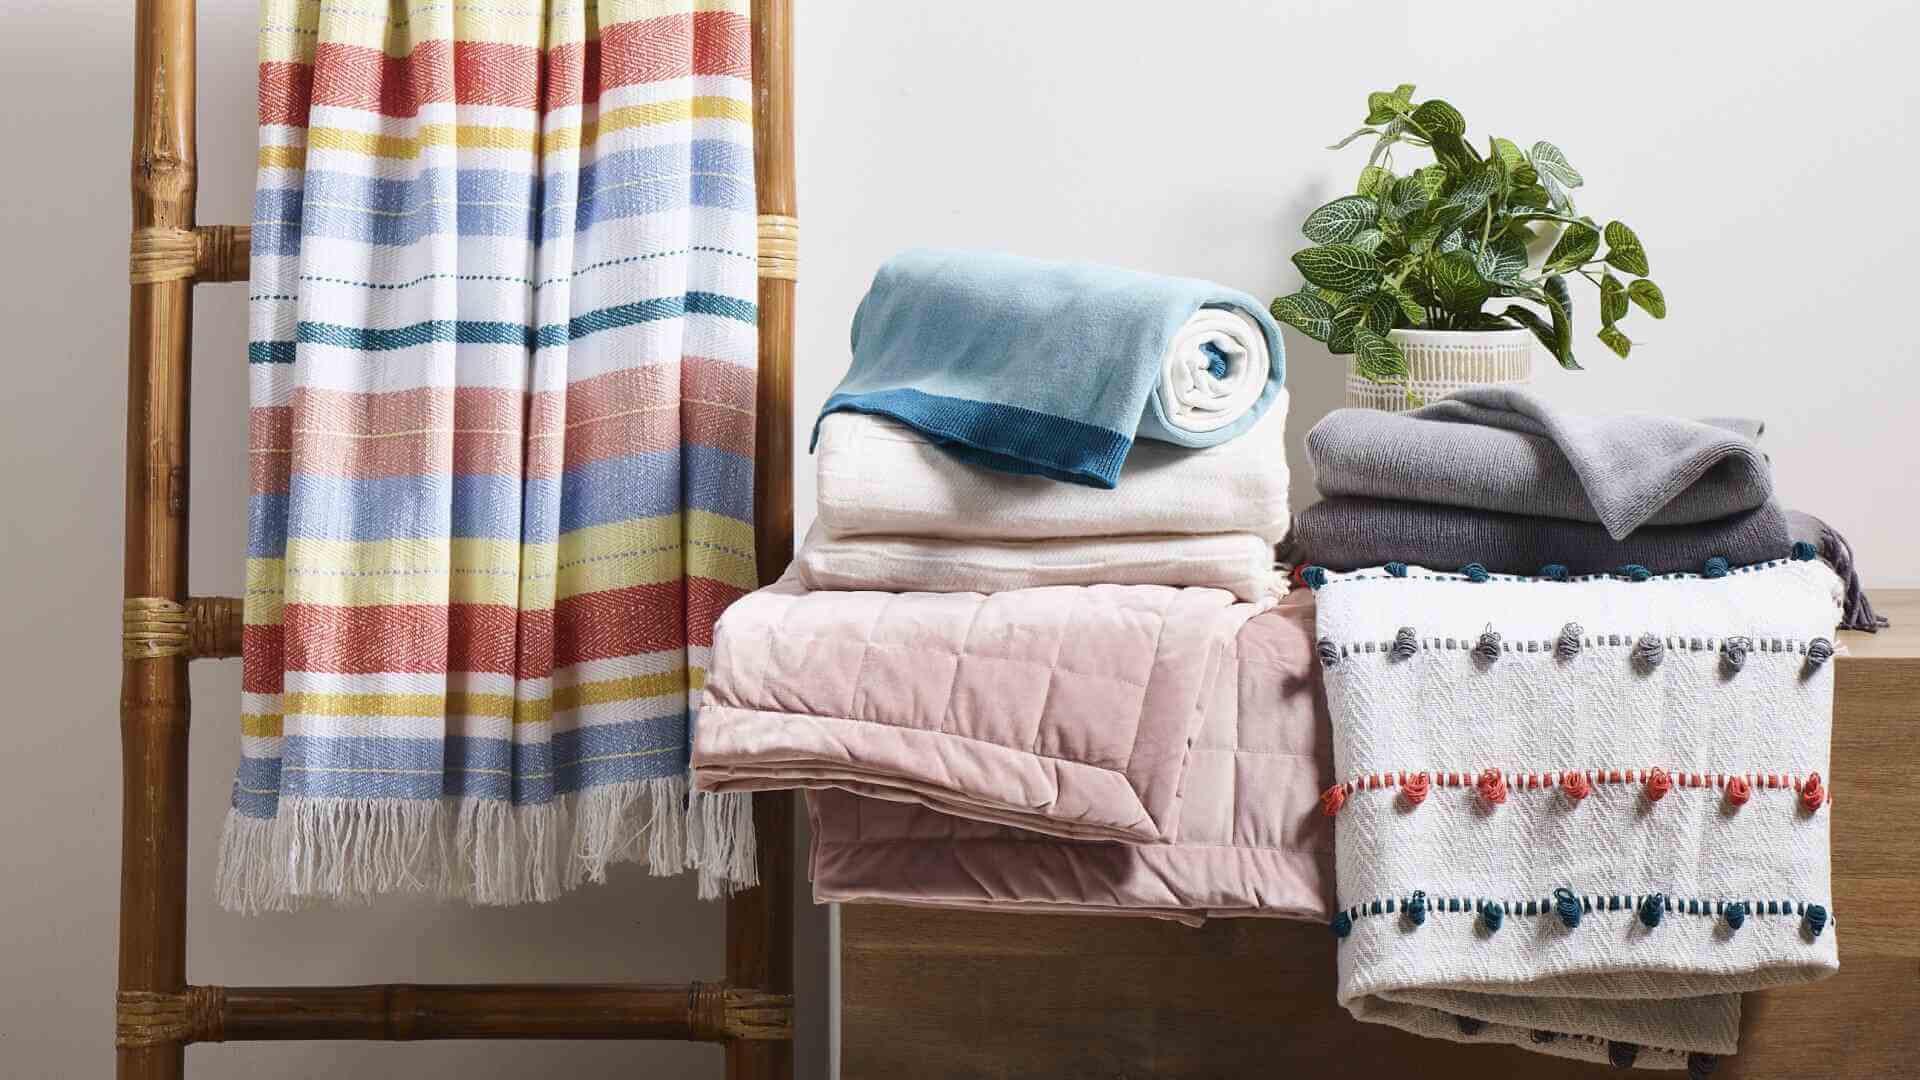 How To Update Your Home With Throws & Blankets